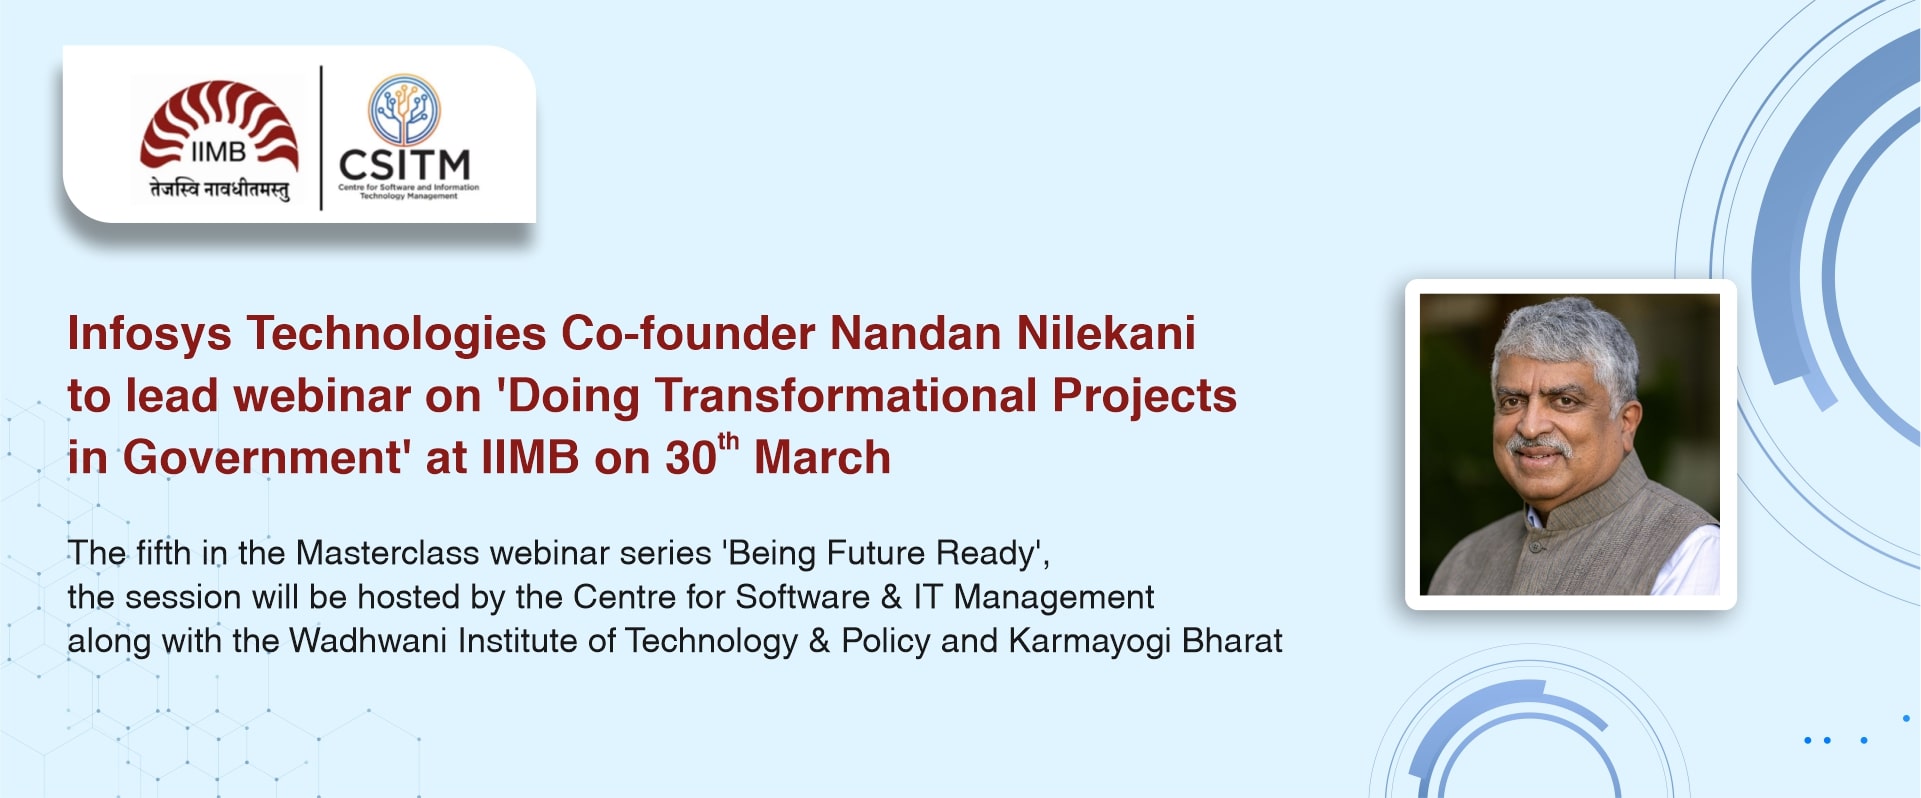 Infosys Technologies Co-founder Nandan Nilekani to lead webinar on ‘Doing Transformational Projects in Government’ at IIMB on 30th March